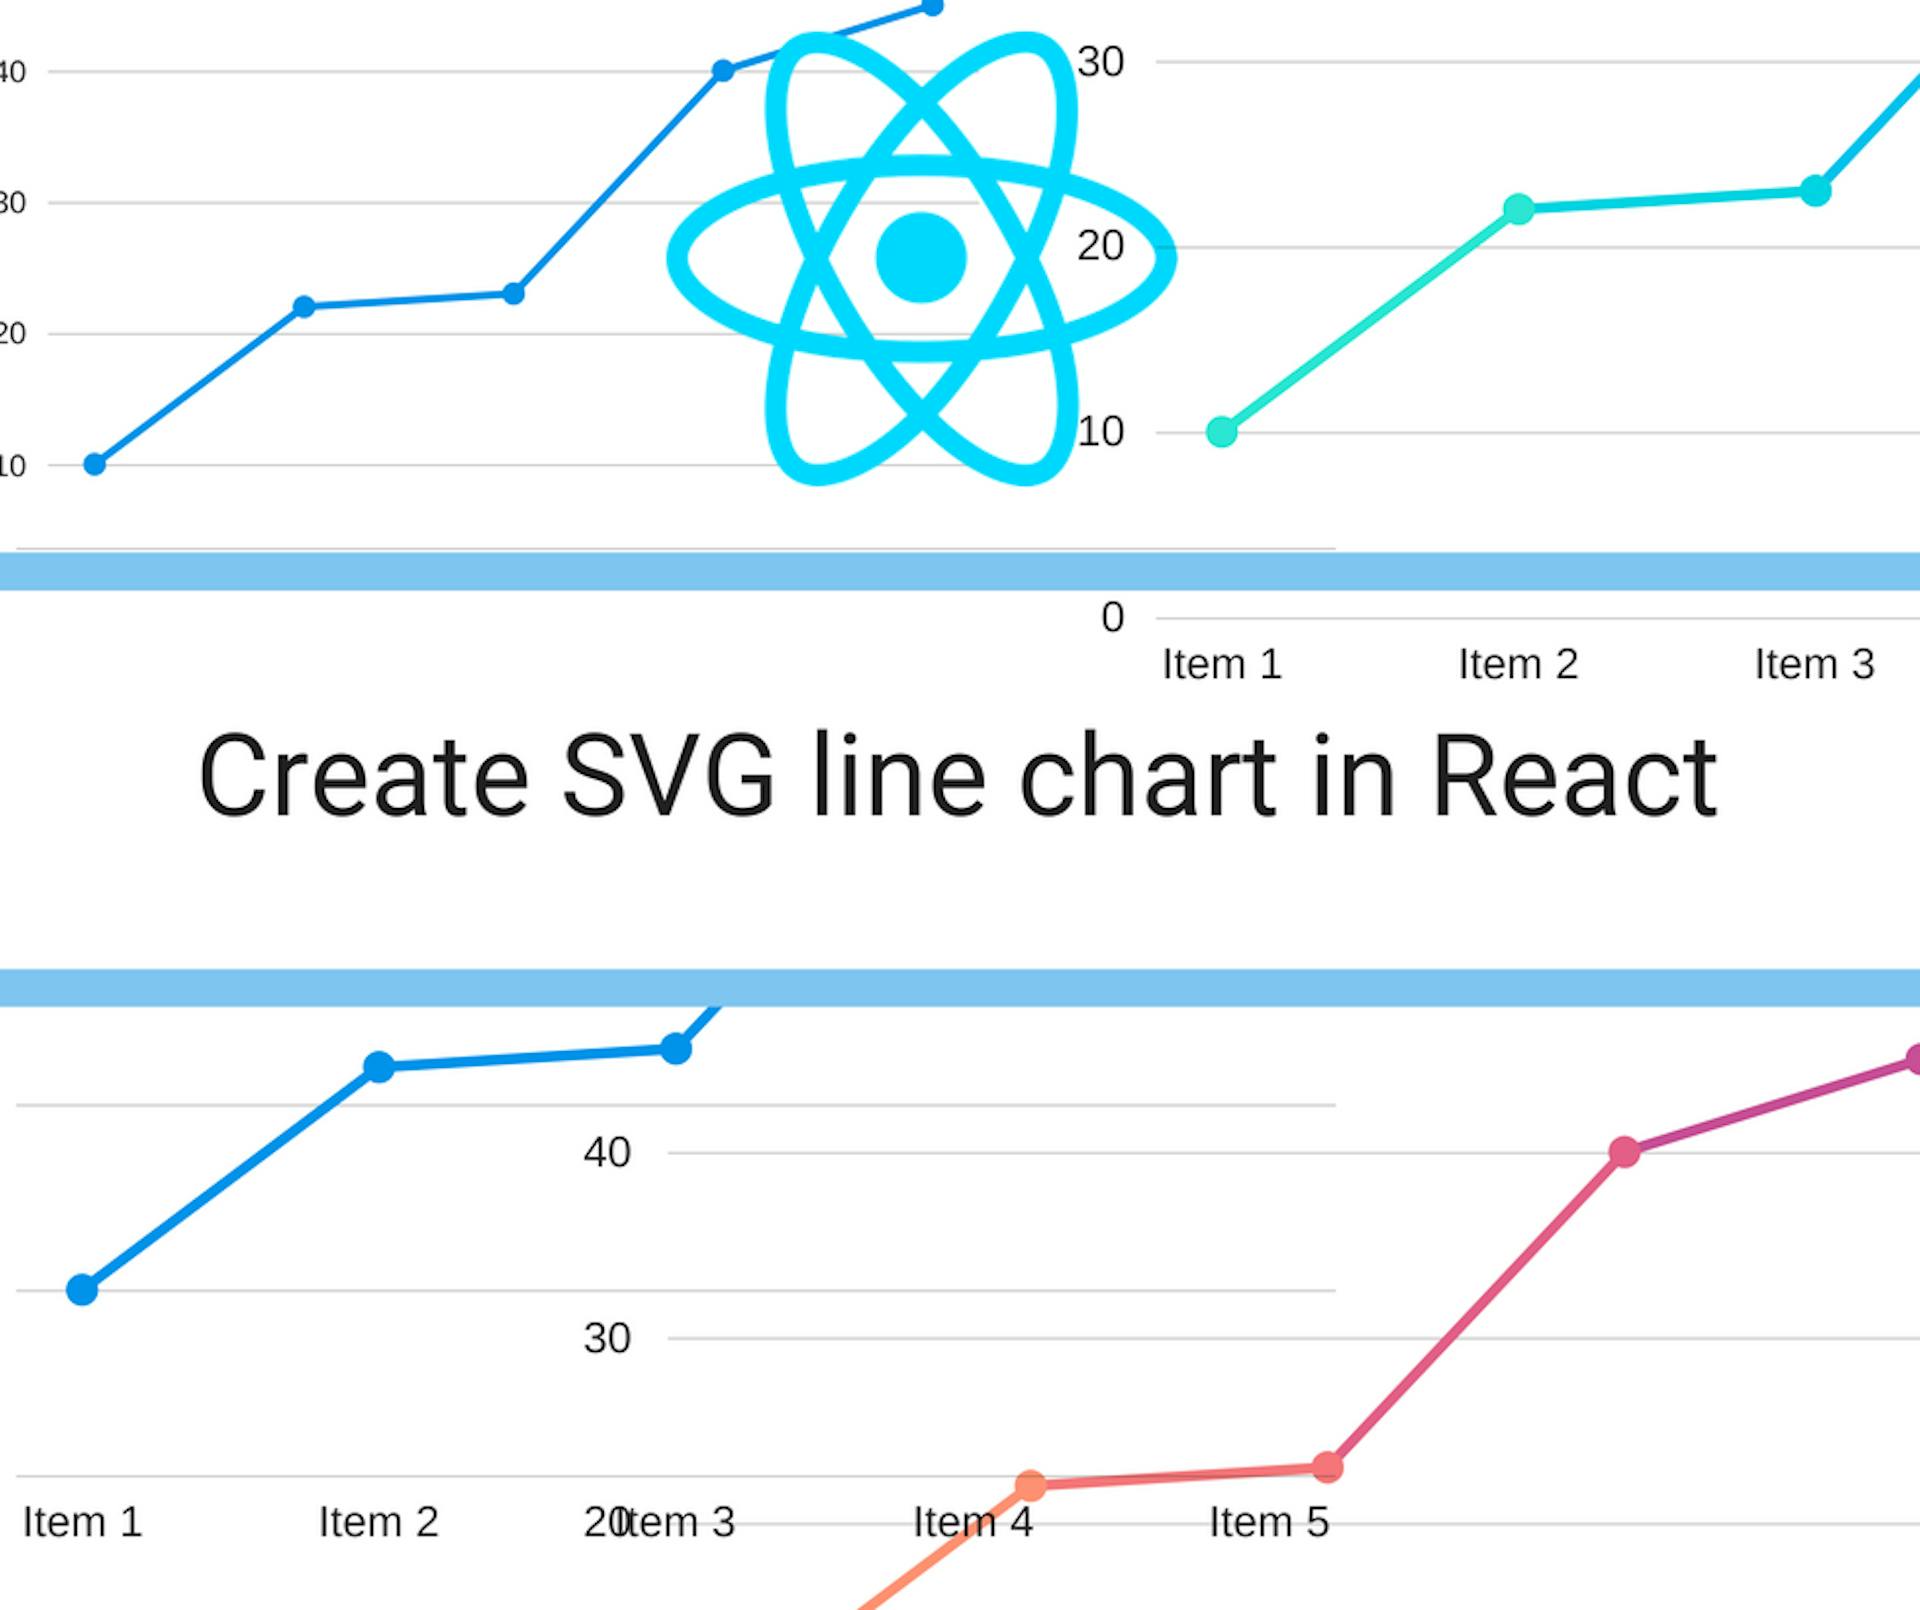 featured image - Create SVG line chart in React